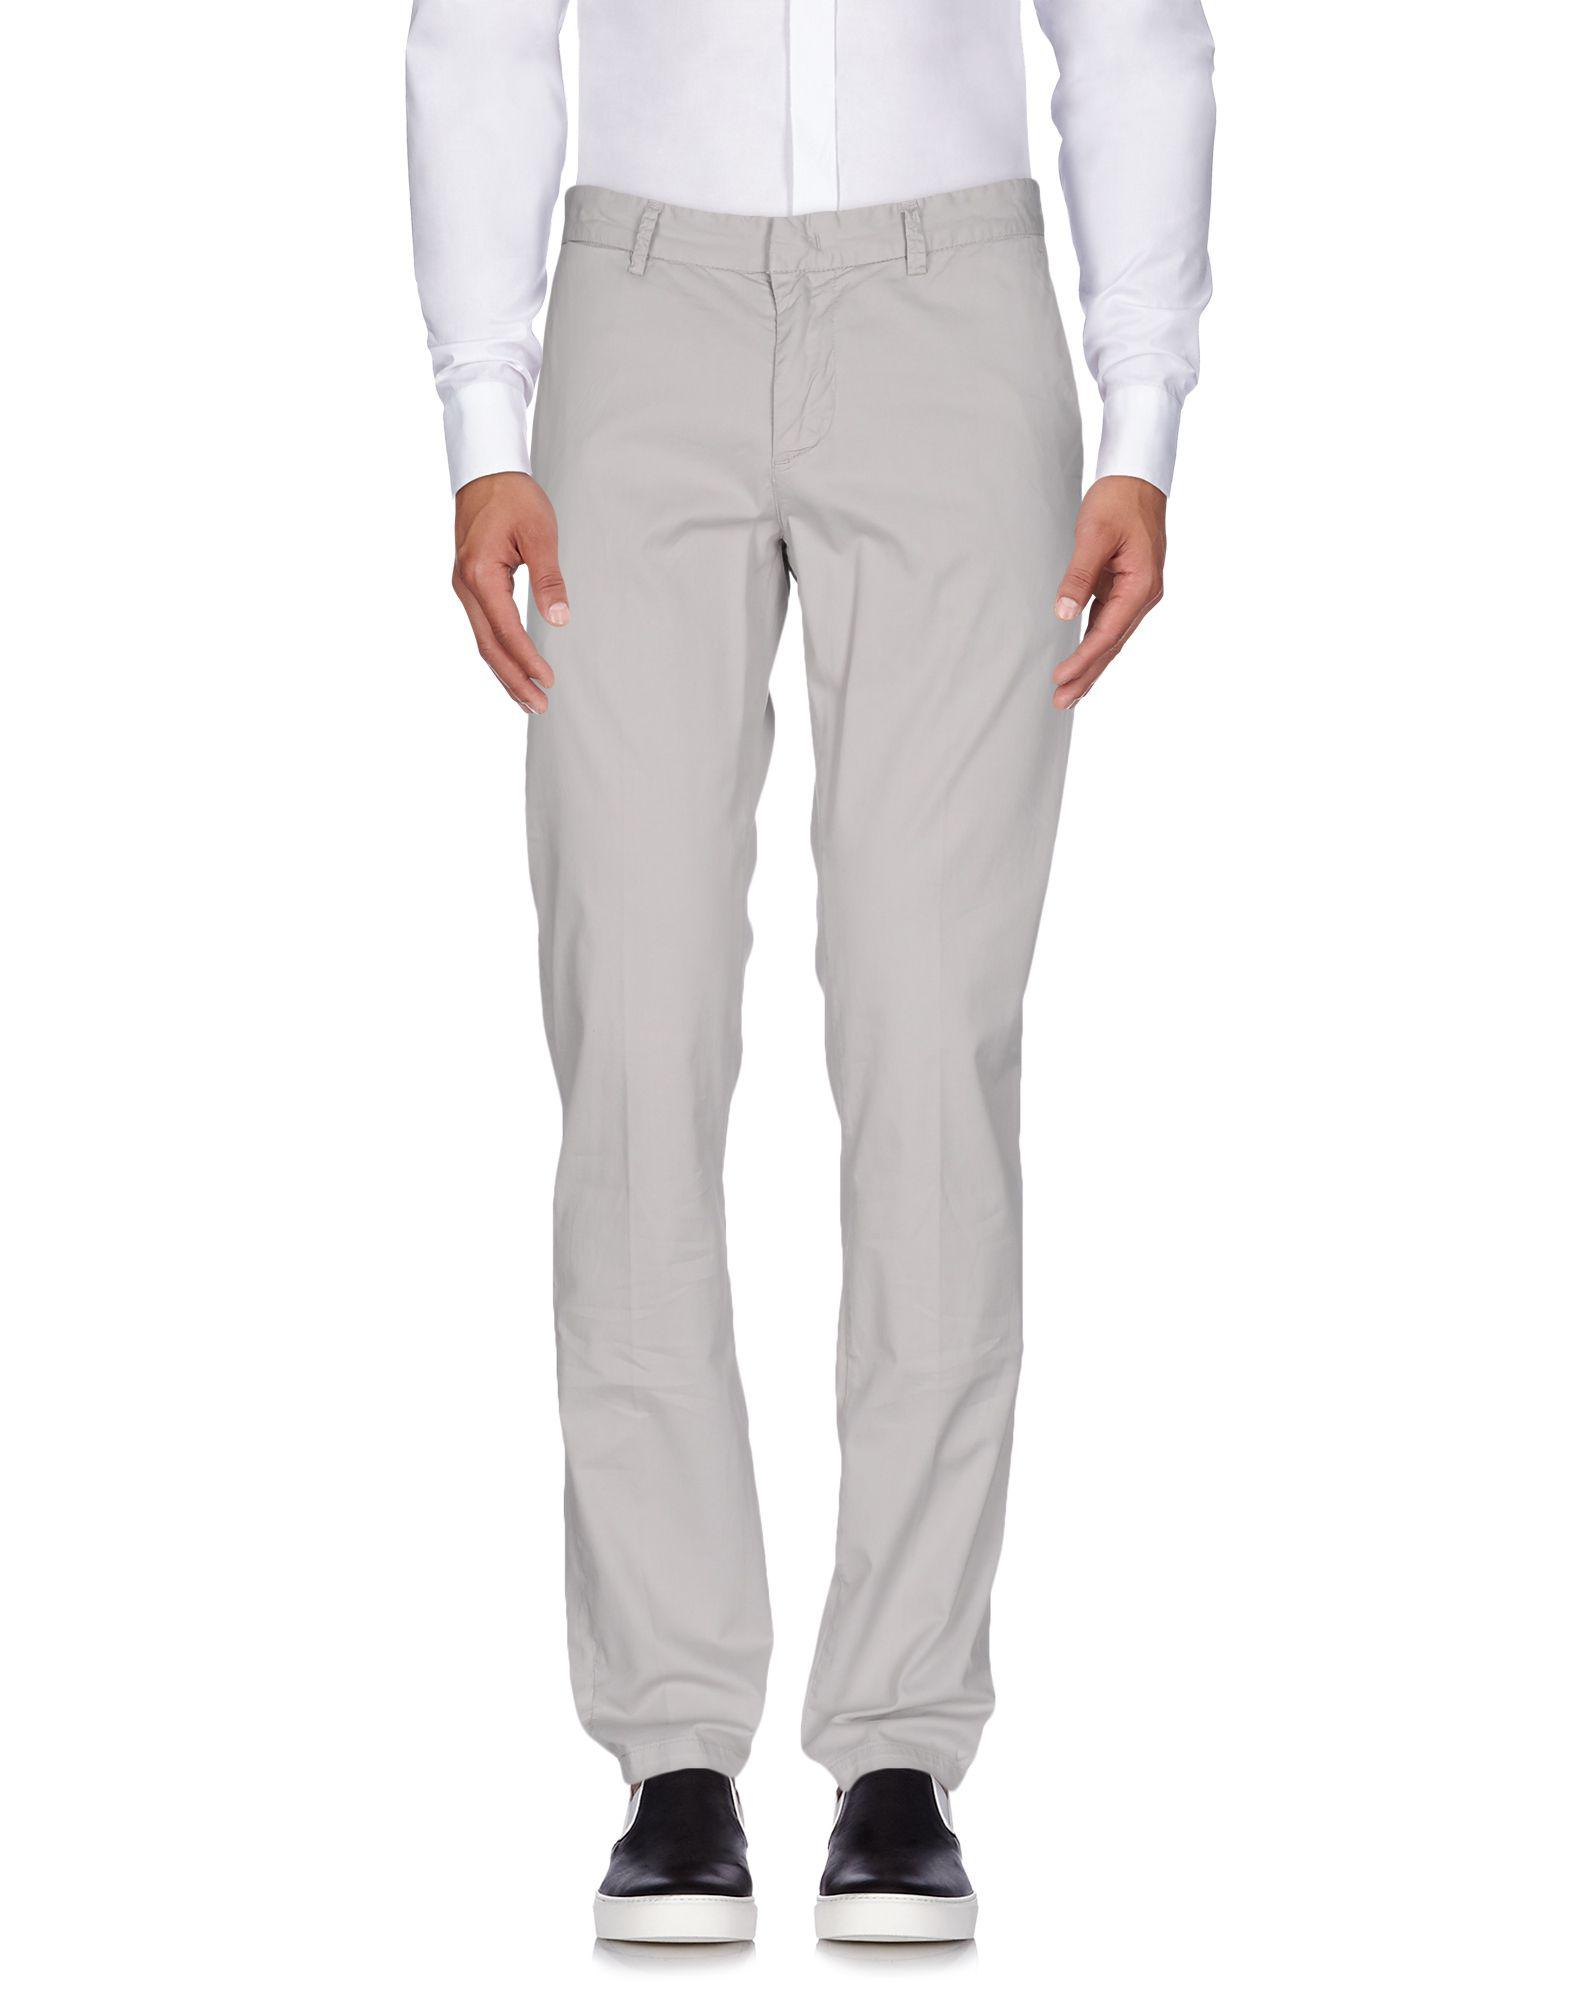 Jaggy Casual Trouser in Gray for Men - Lyst